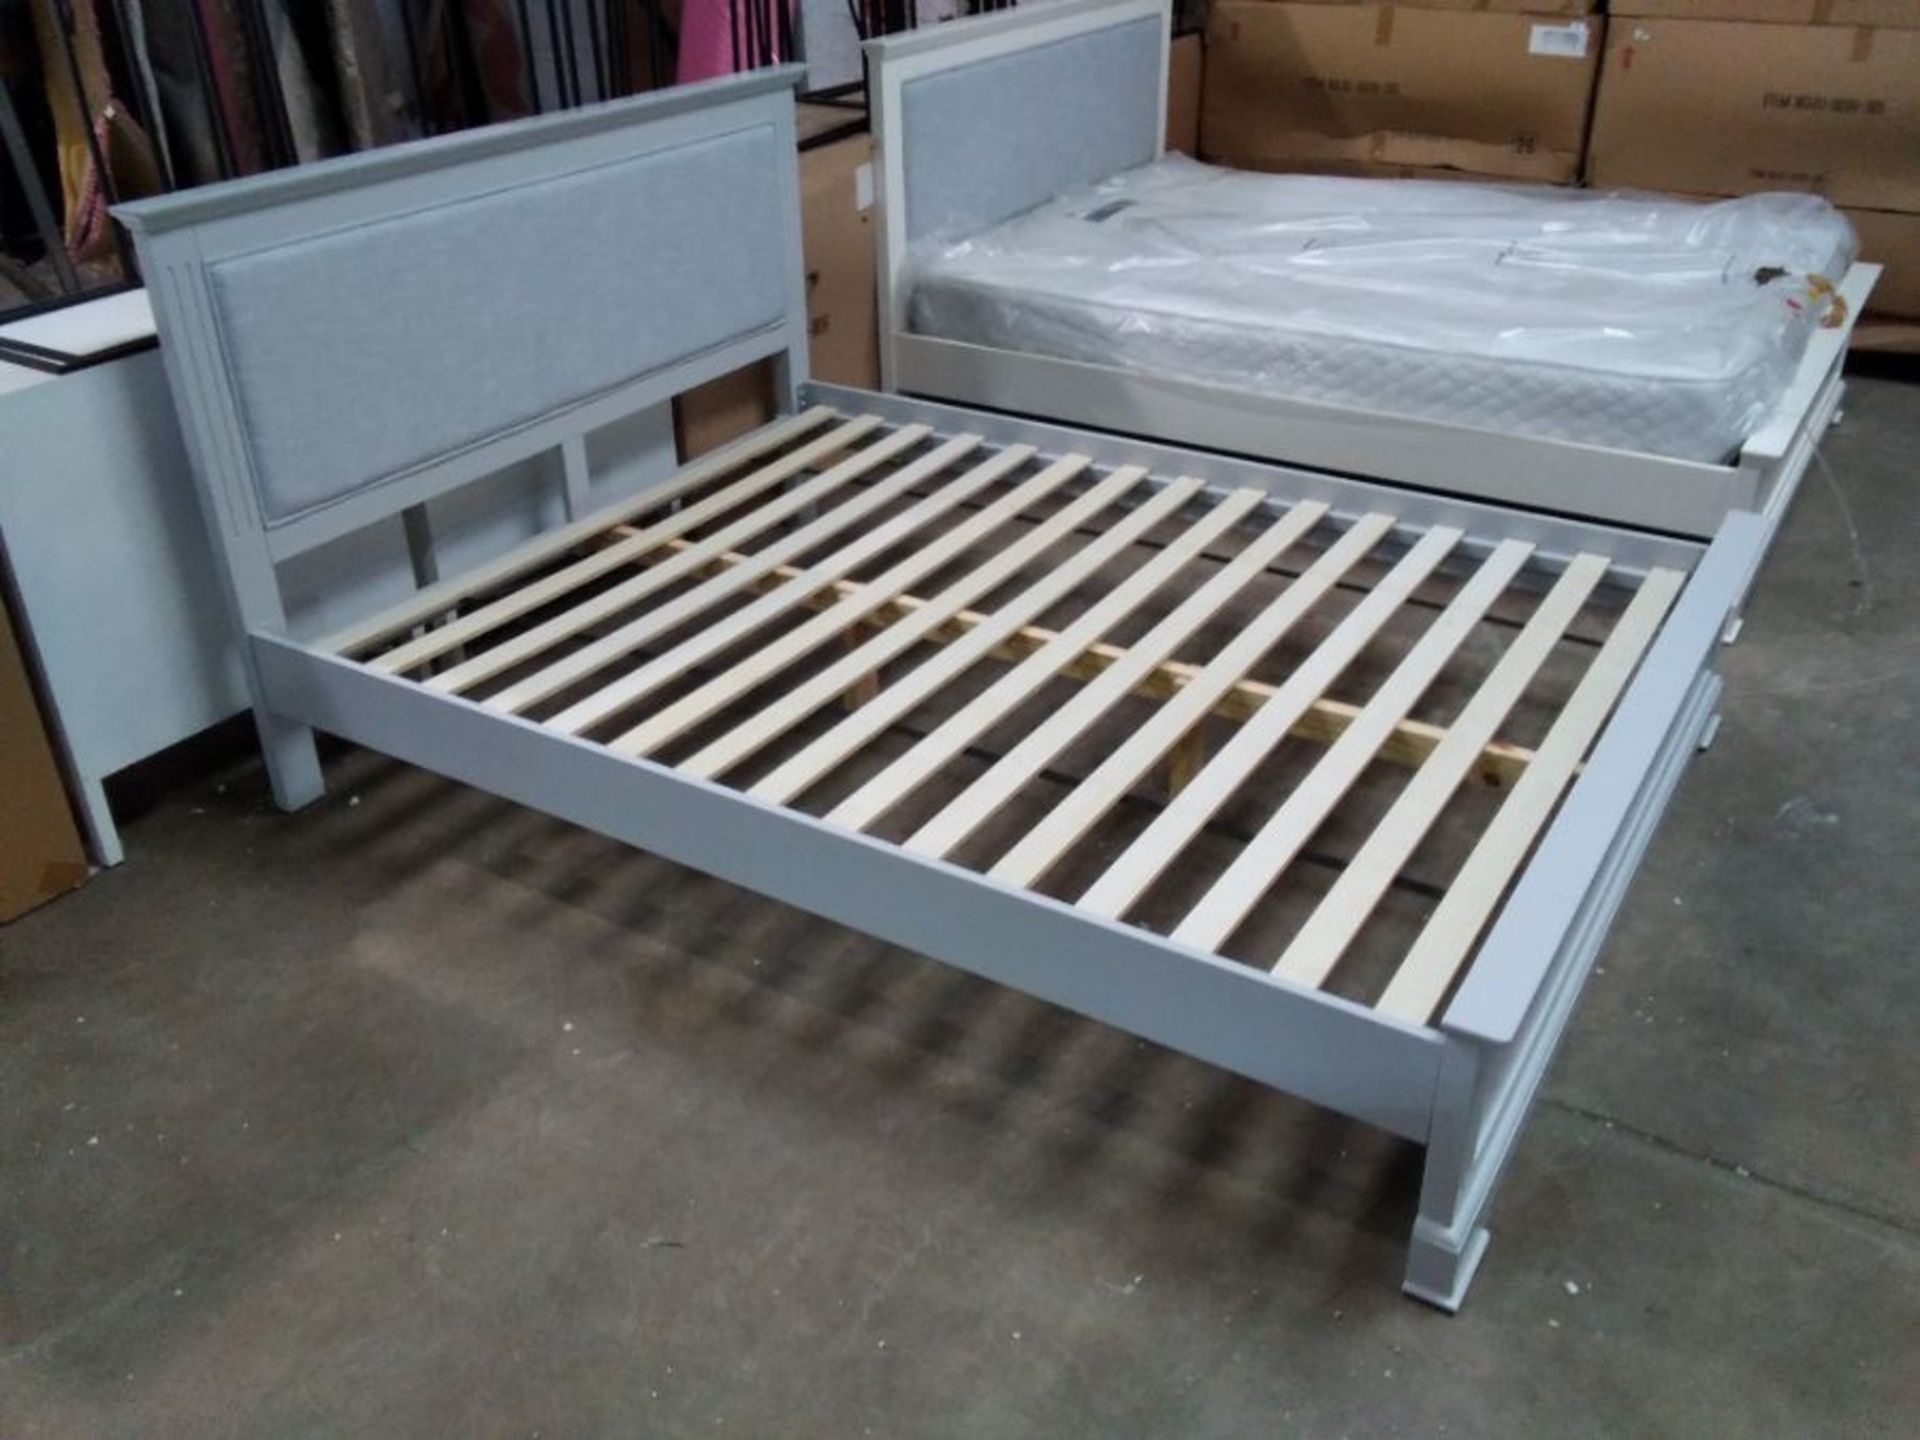 BANBURY GREY PAINTED KING SIZE BED FRAME (MARKED)